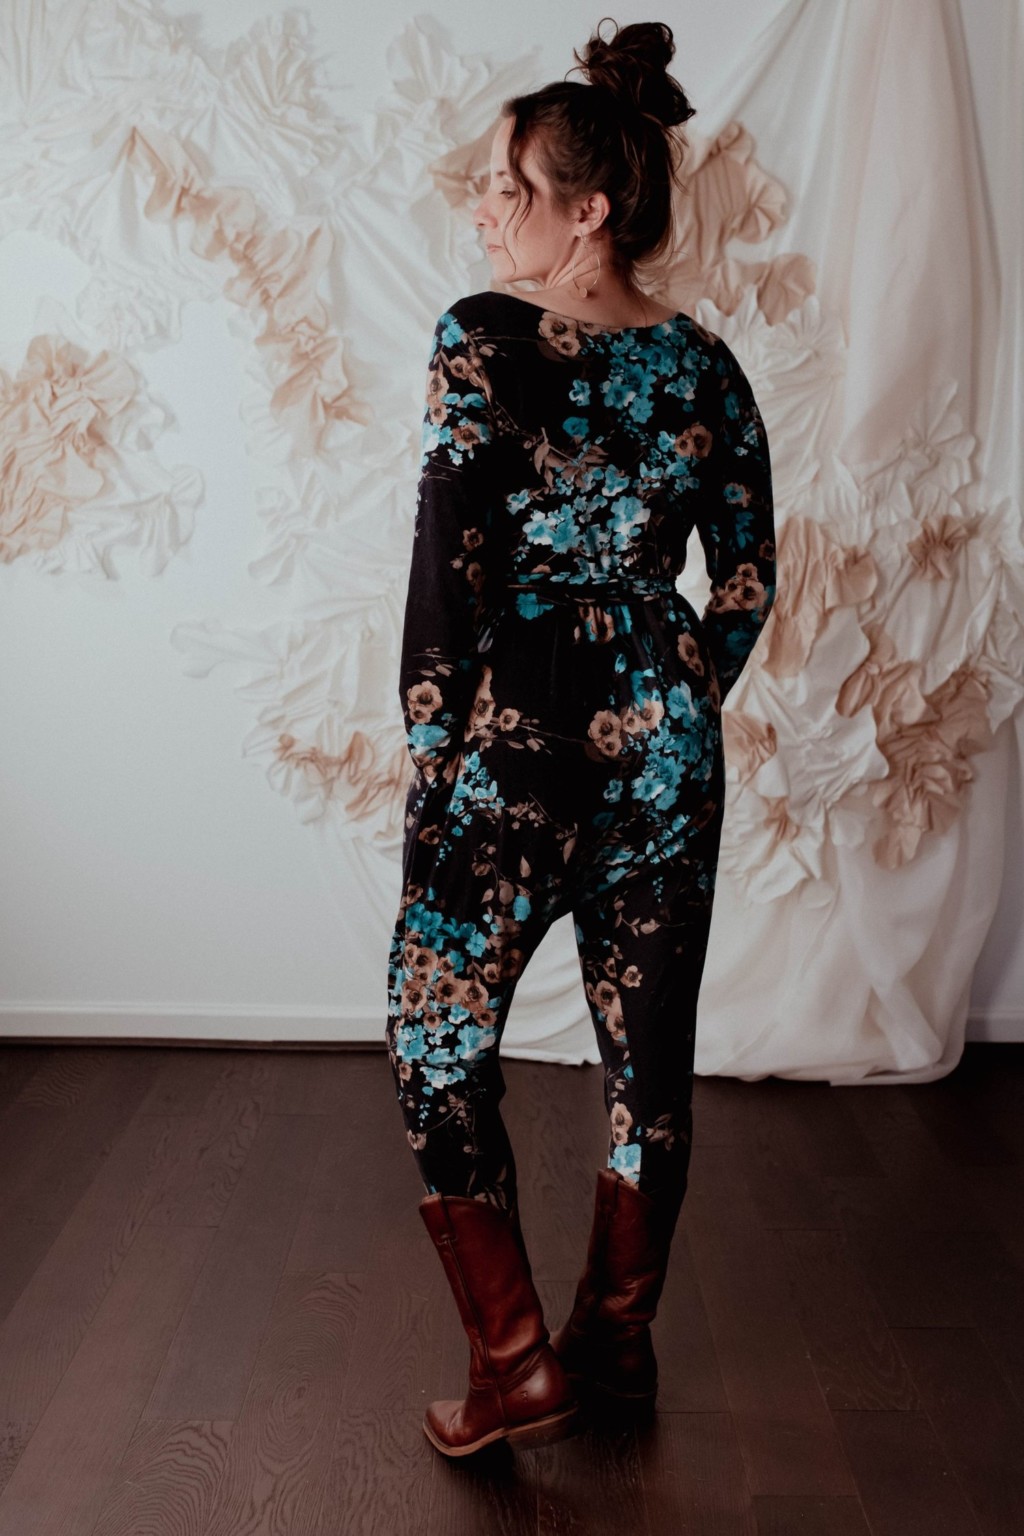 Meg wears a floral talam jumpsuit, facing away from the camera to show off the back